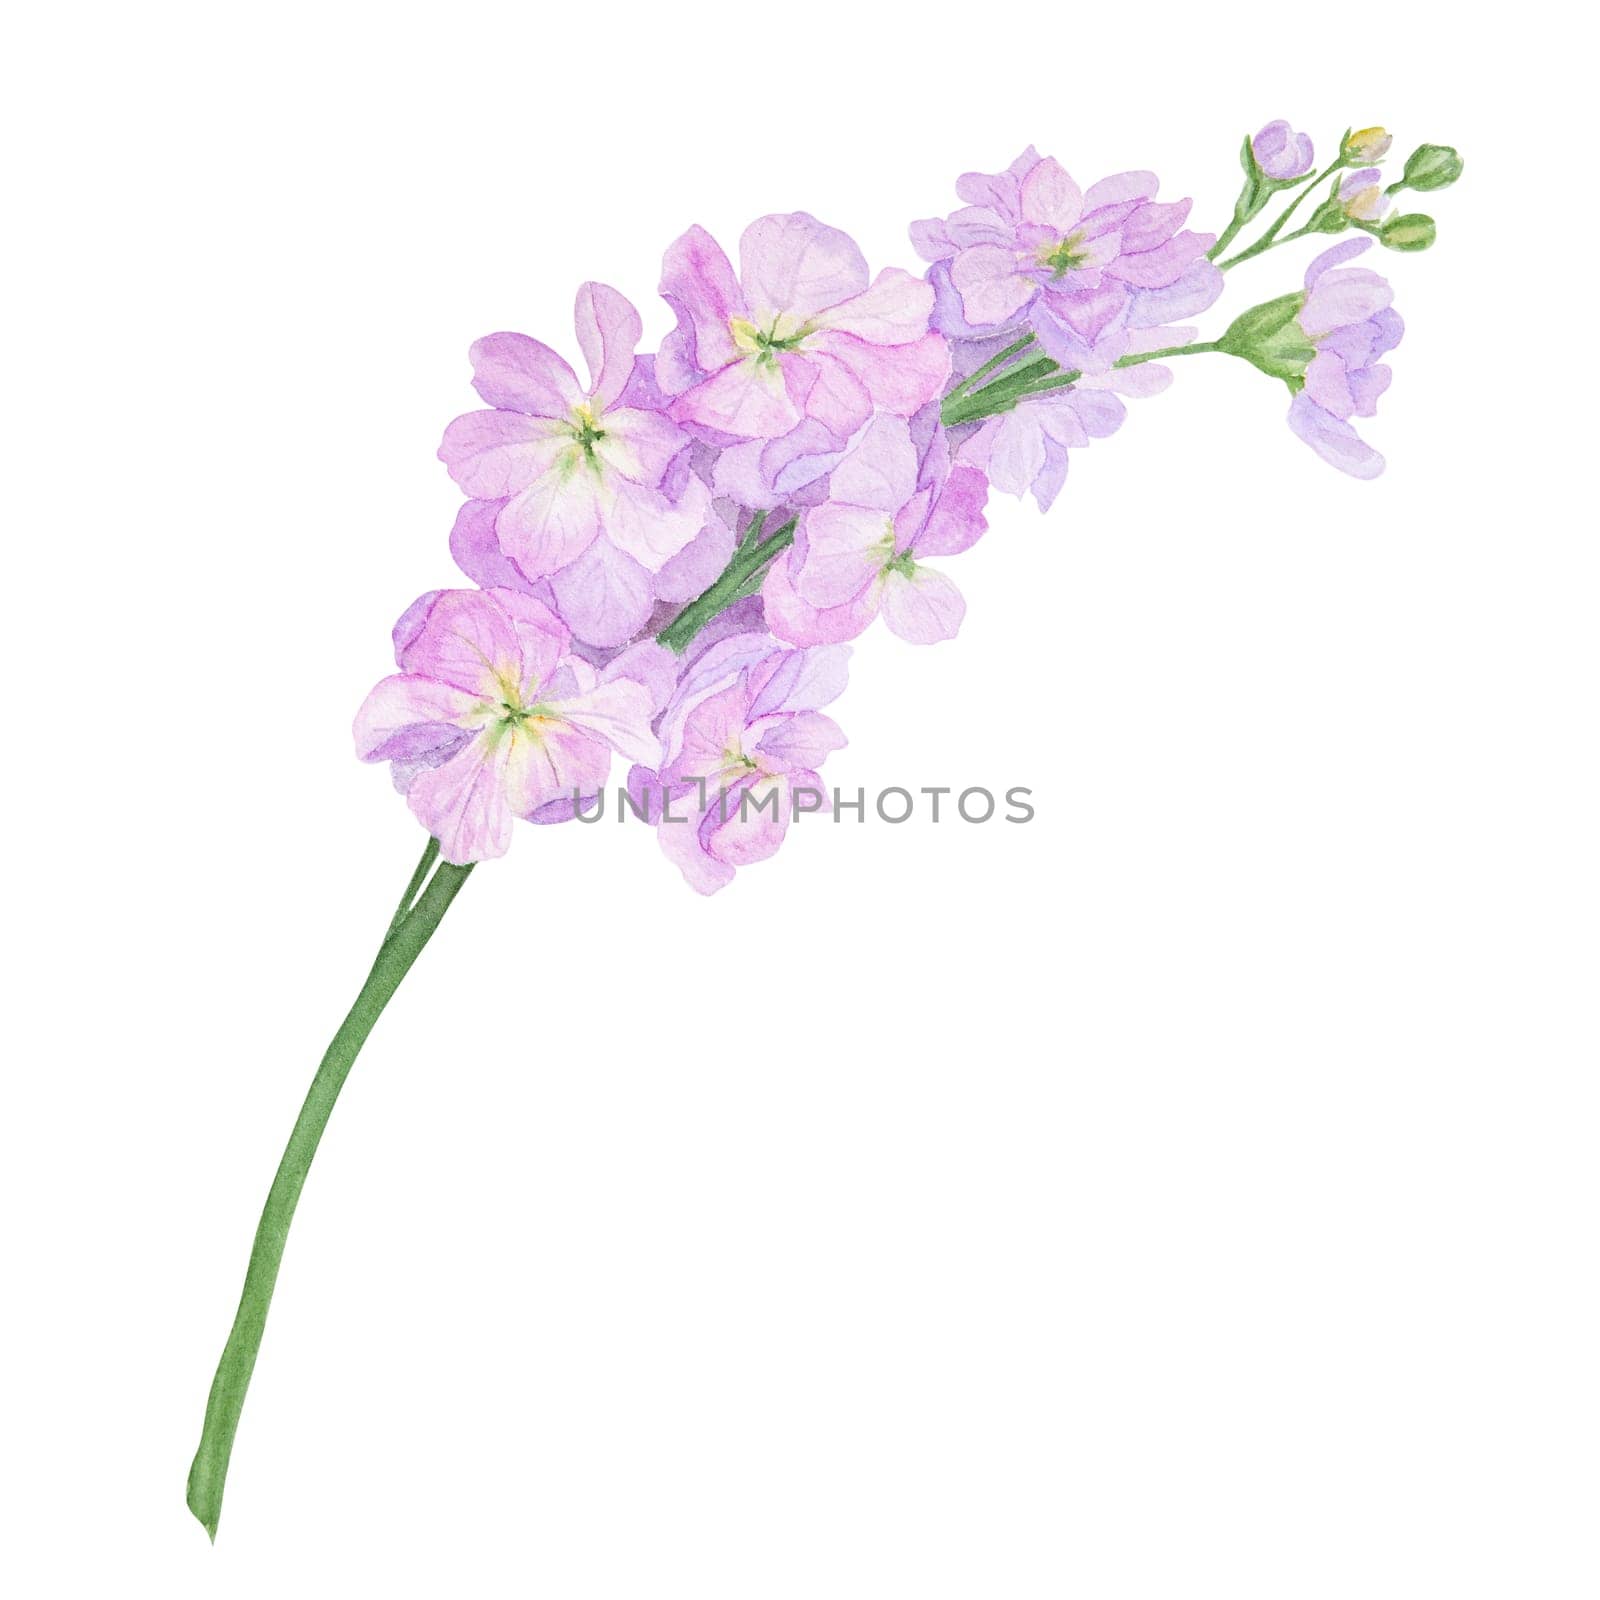 Lilac Gillyflower watercolor illustration. Hand drawn botanical painting, floral sketch. Colorful flower clipart for summer, autumn design of wedding invitation, print, greeting, sublimation, textile by florainlove_art